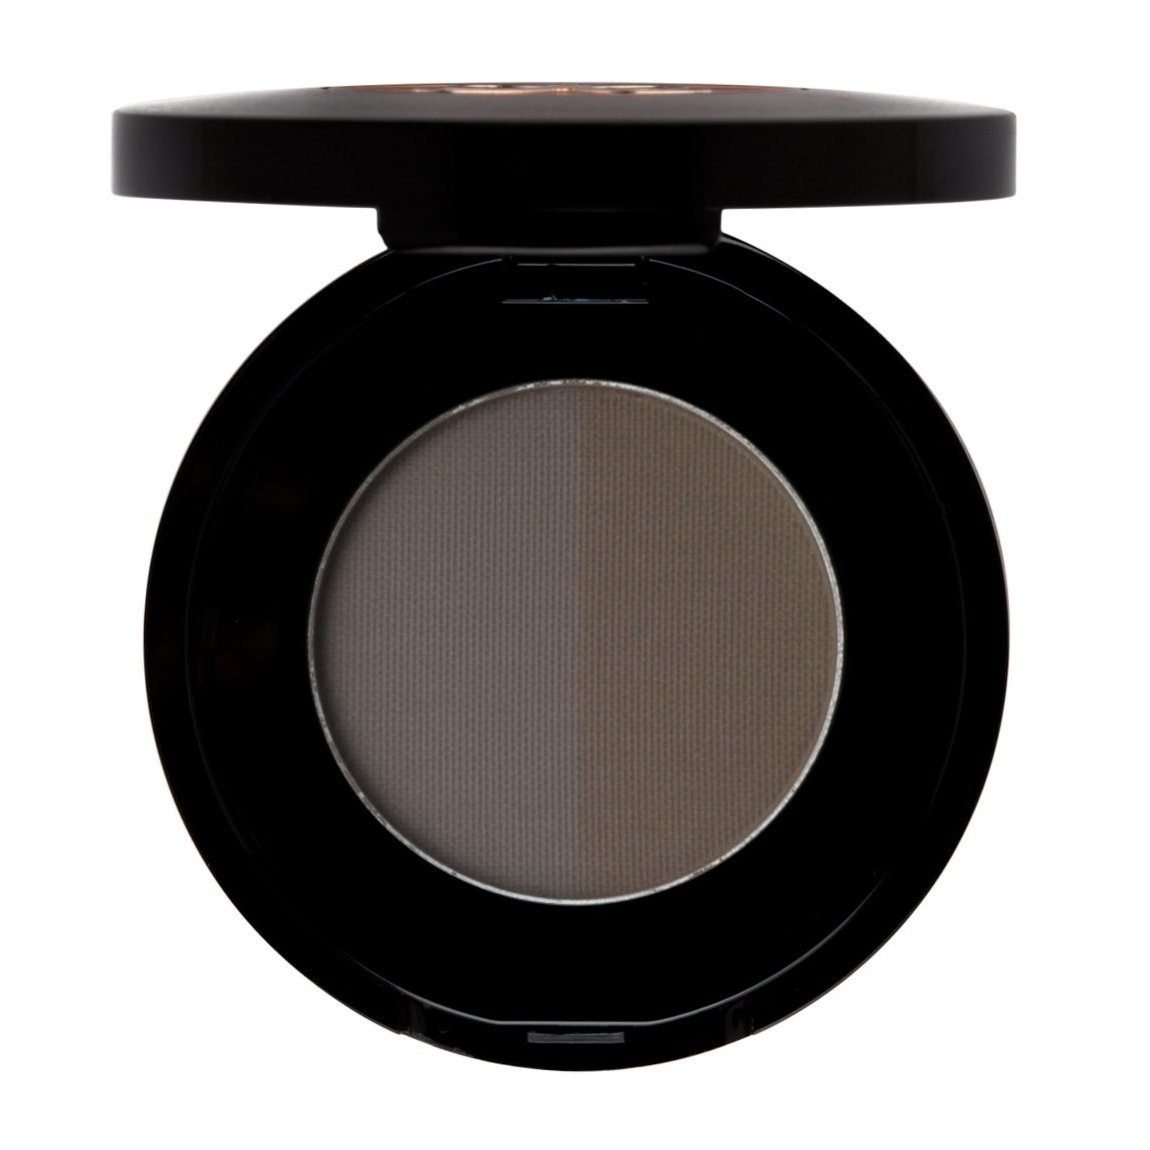 Anastasia Beverly Hills Brow Powder Duo Ash Brown alternative view 1 - product swatch.